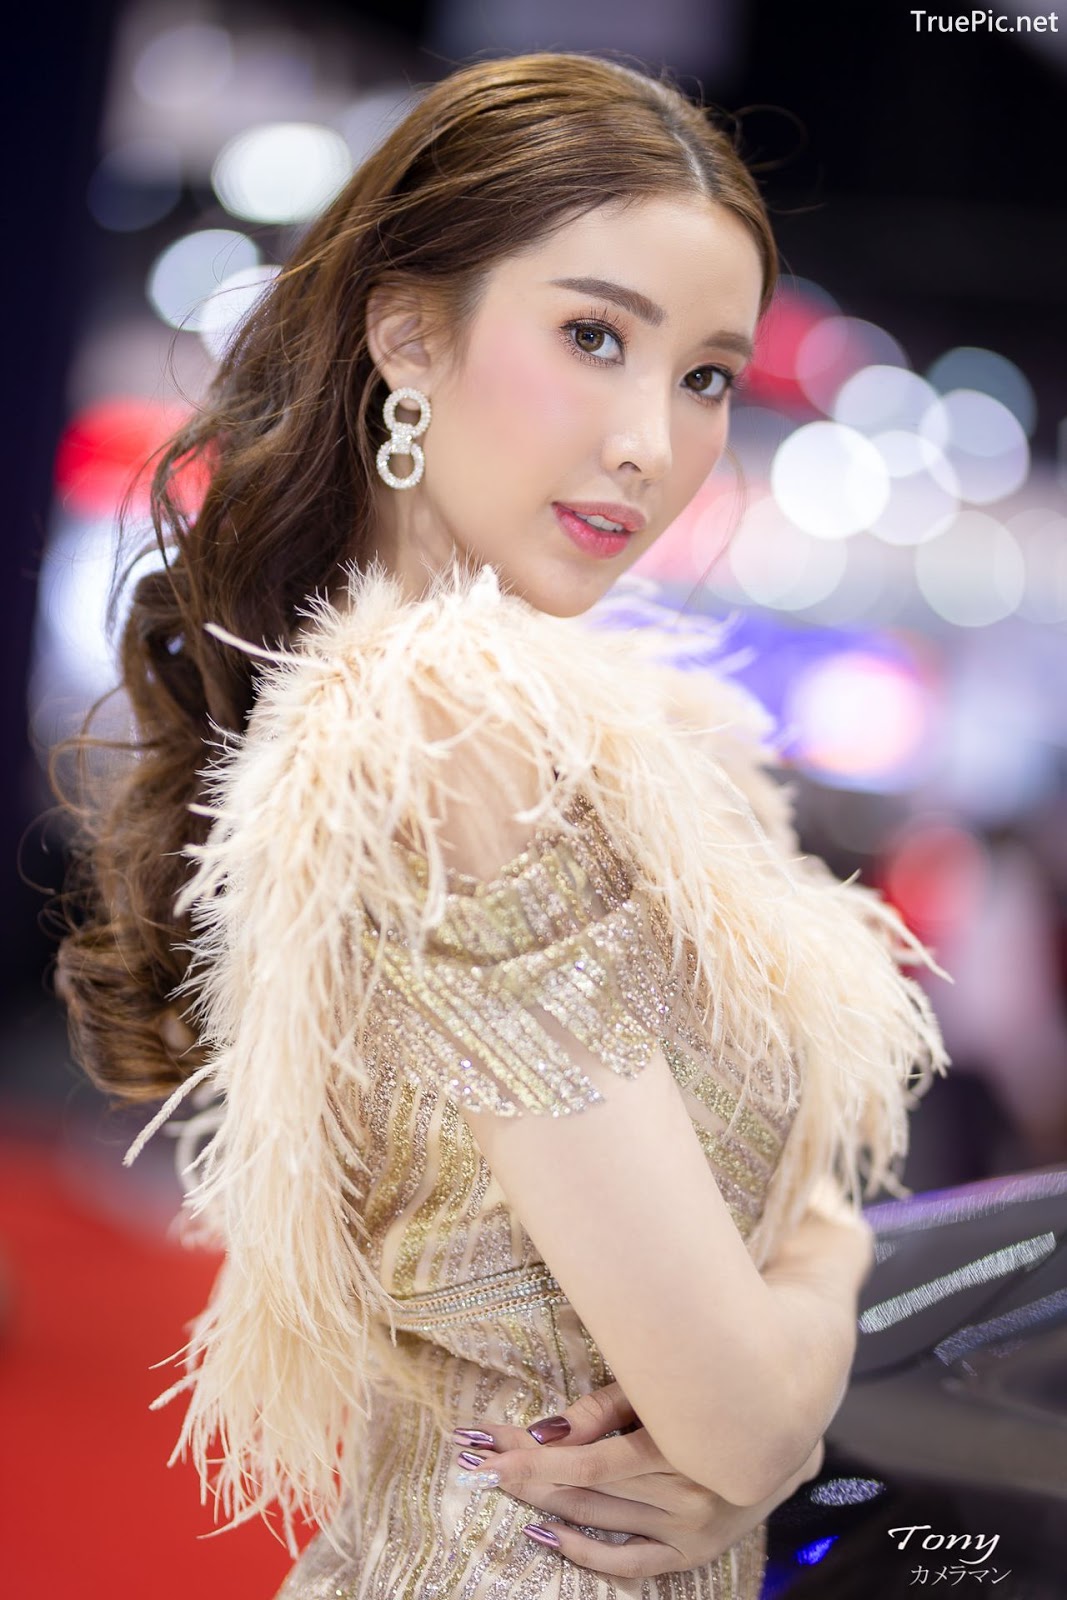 Image-Thailand-Hot-Model-Thai-Racing-Girl-At-Motor-Show-2019-TruePic.net- Picture-25